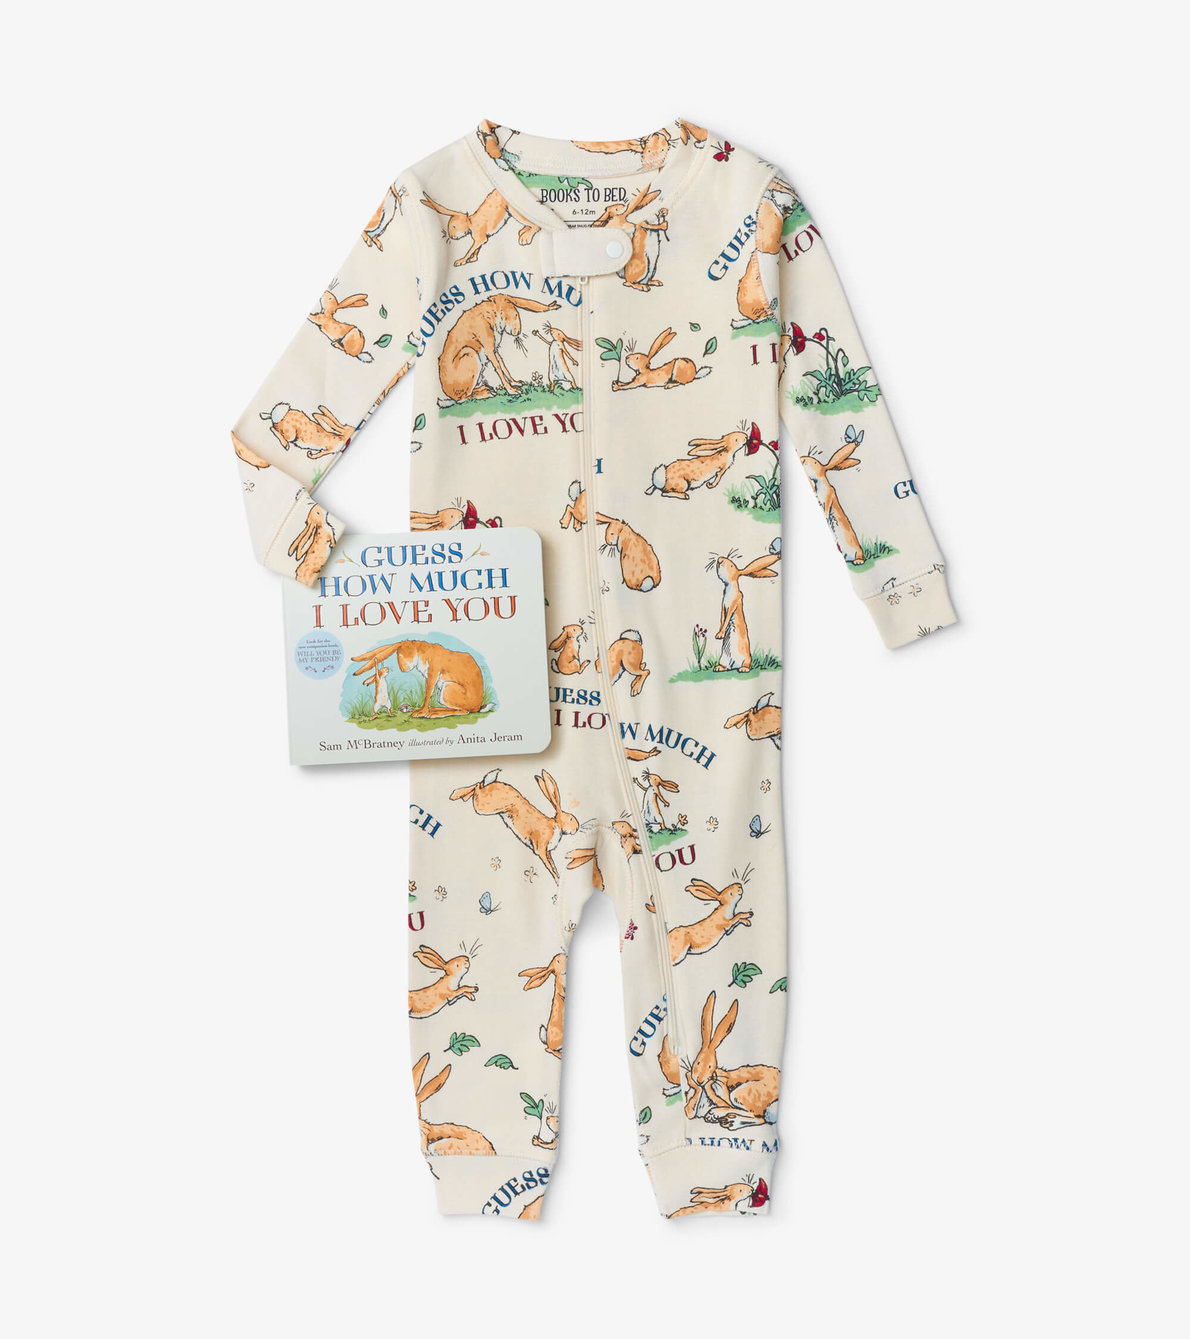 View larger image of Guess How Much I Love You Book and Infant Coverall